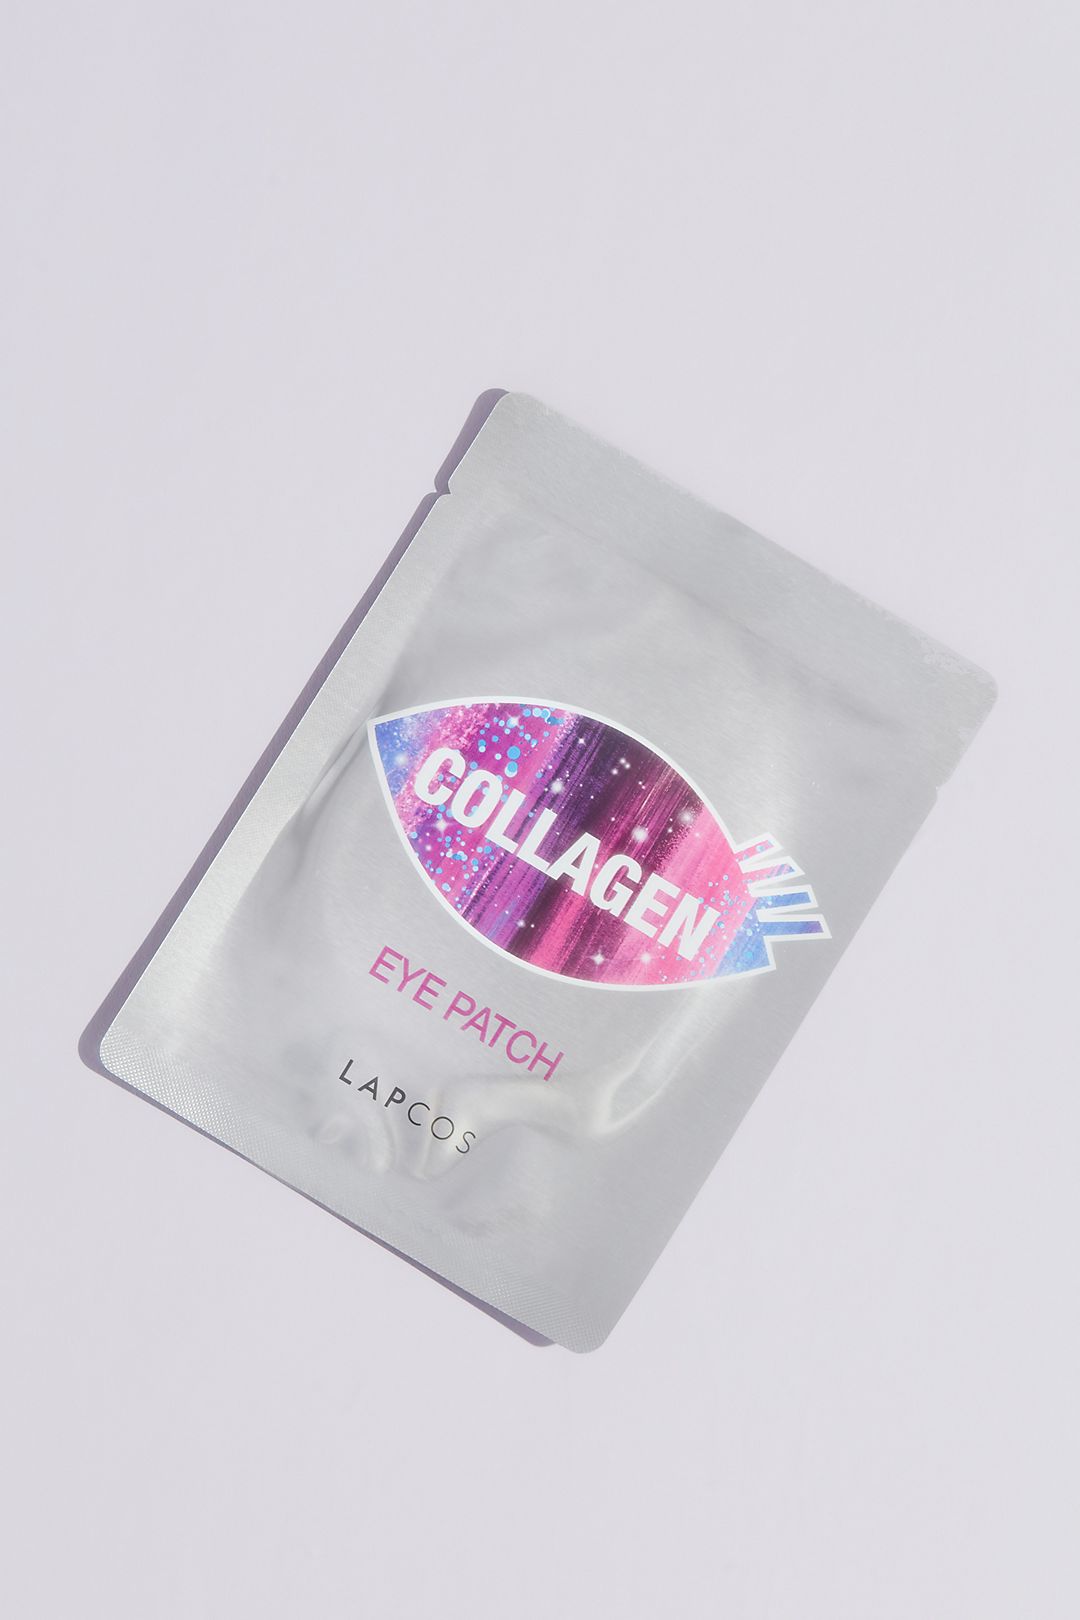 Lapcos Collagen Eye Patch Mask Image 1